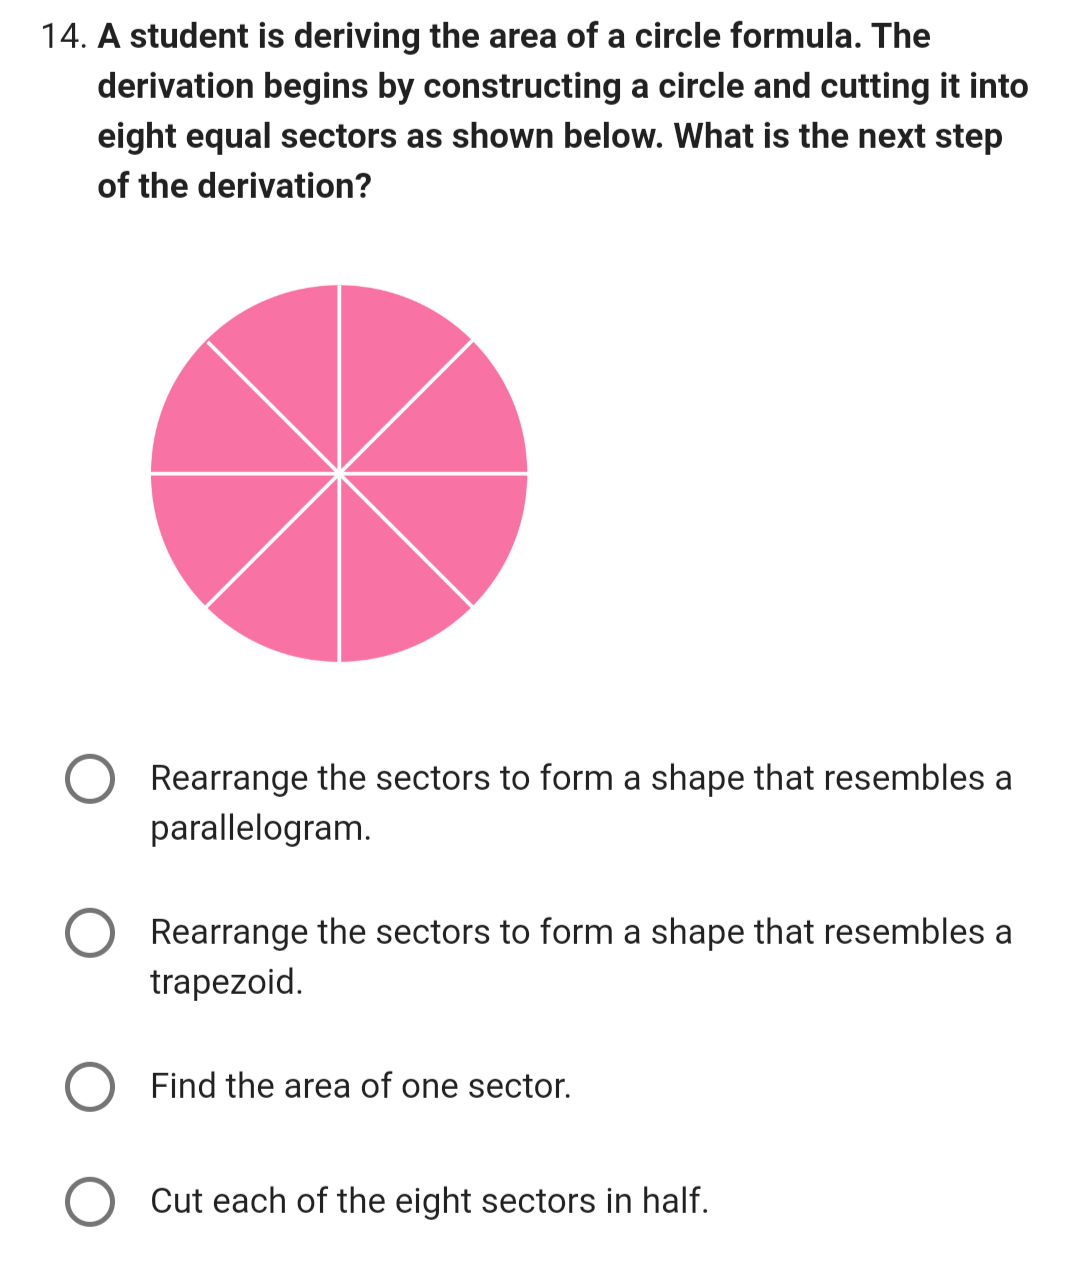 14. A student is deriving the area of a circle formula. The
derivation begins by constructing a circle and cutting it into
eight equal sectors as shown below. What is the next step
of the derivation?
Rearrange the sectors to form a shape that resembles a
parallelogram.
Rearrange the sectors to form a shape that resembles a
trapezoid.
Find the area of one sector.
Cut each of the eight sectors in half.